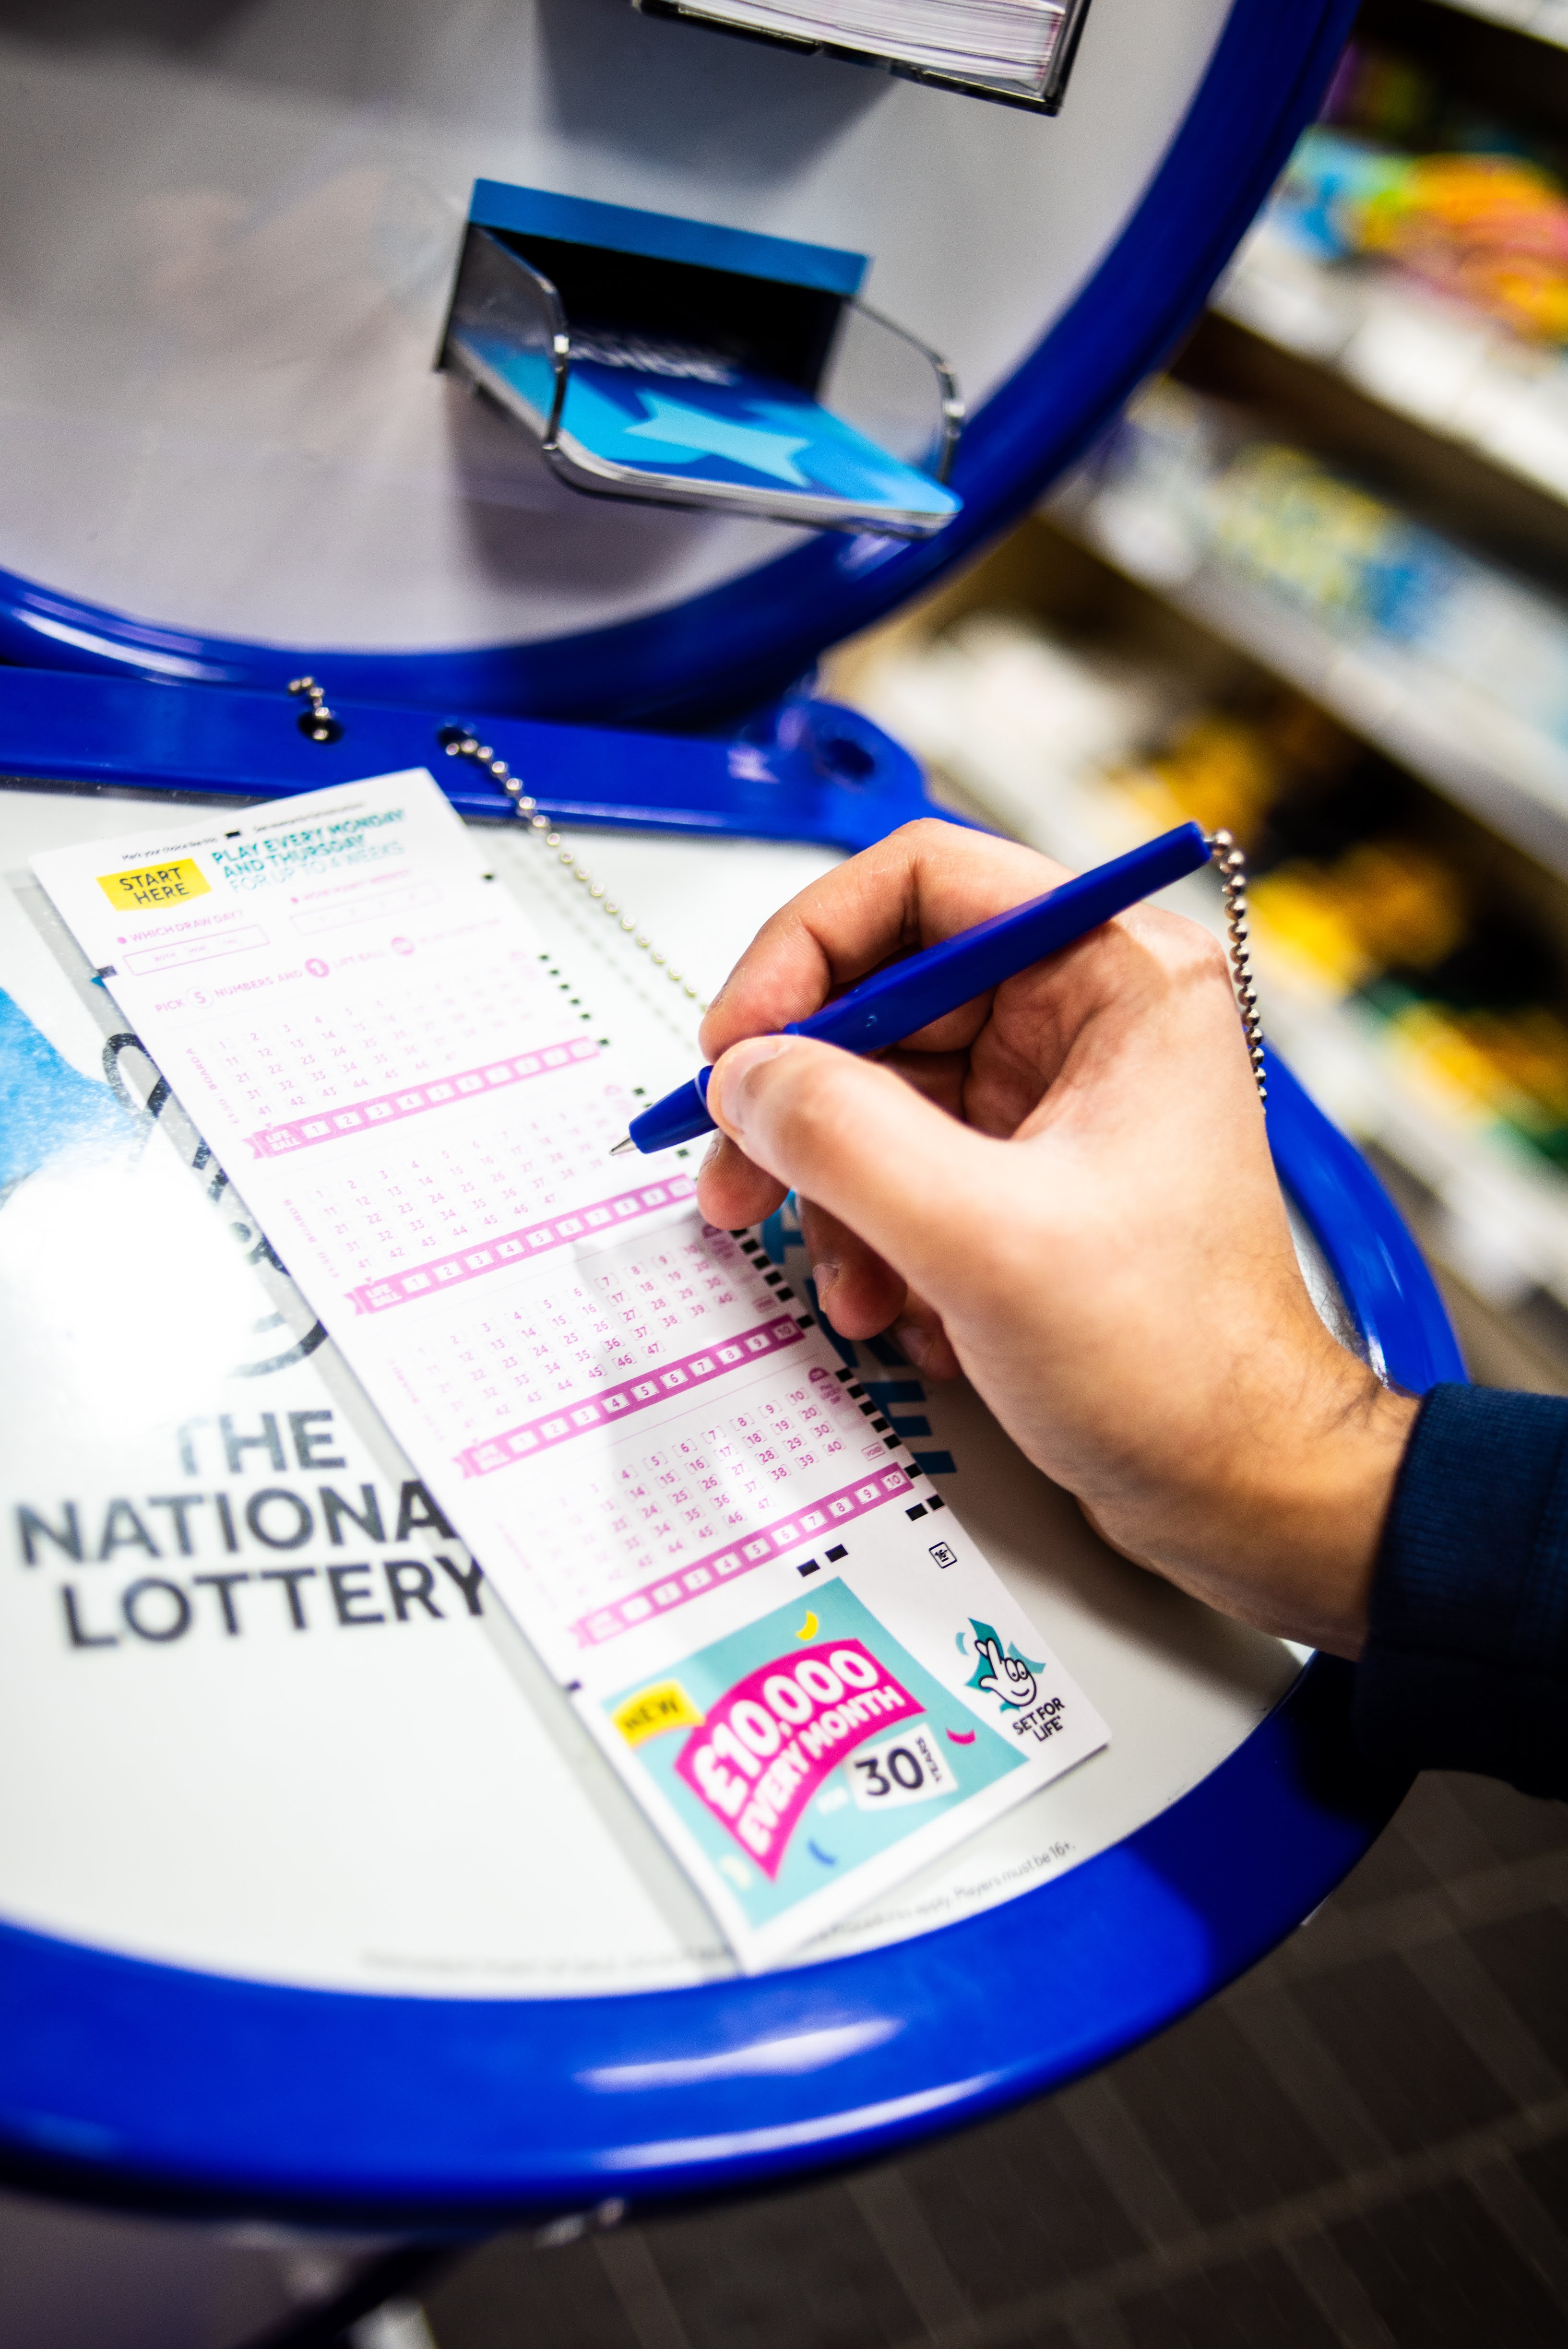 New National Lottery game offers opportunities galore for retailers ...